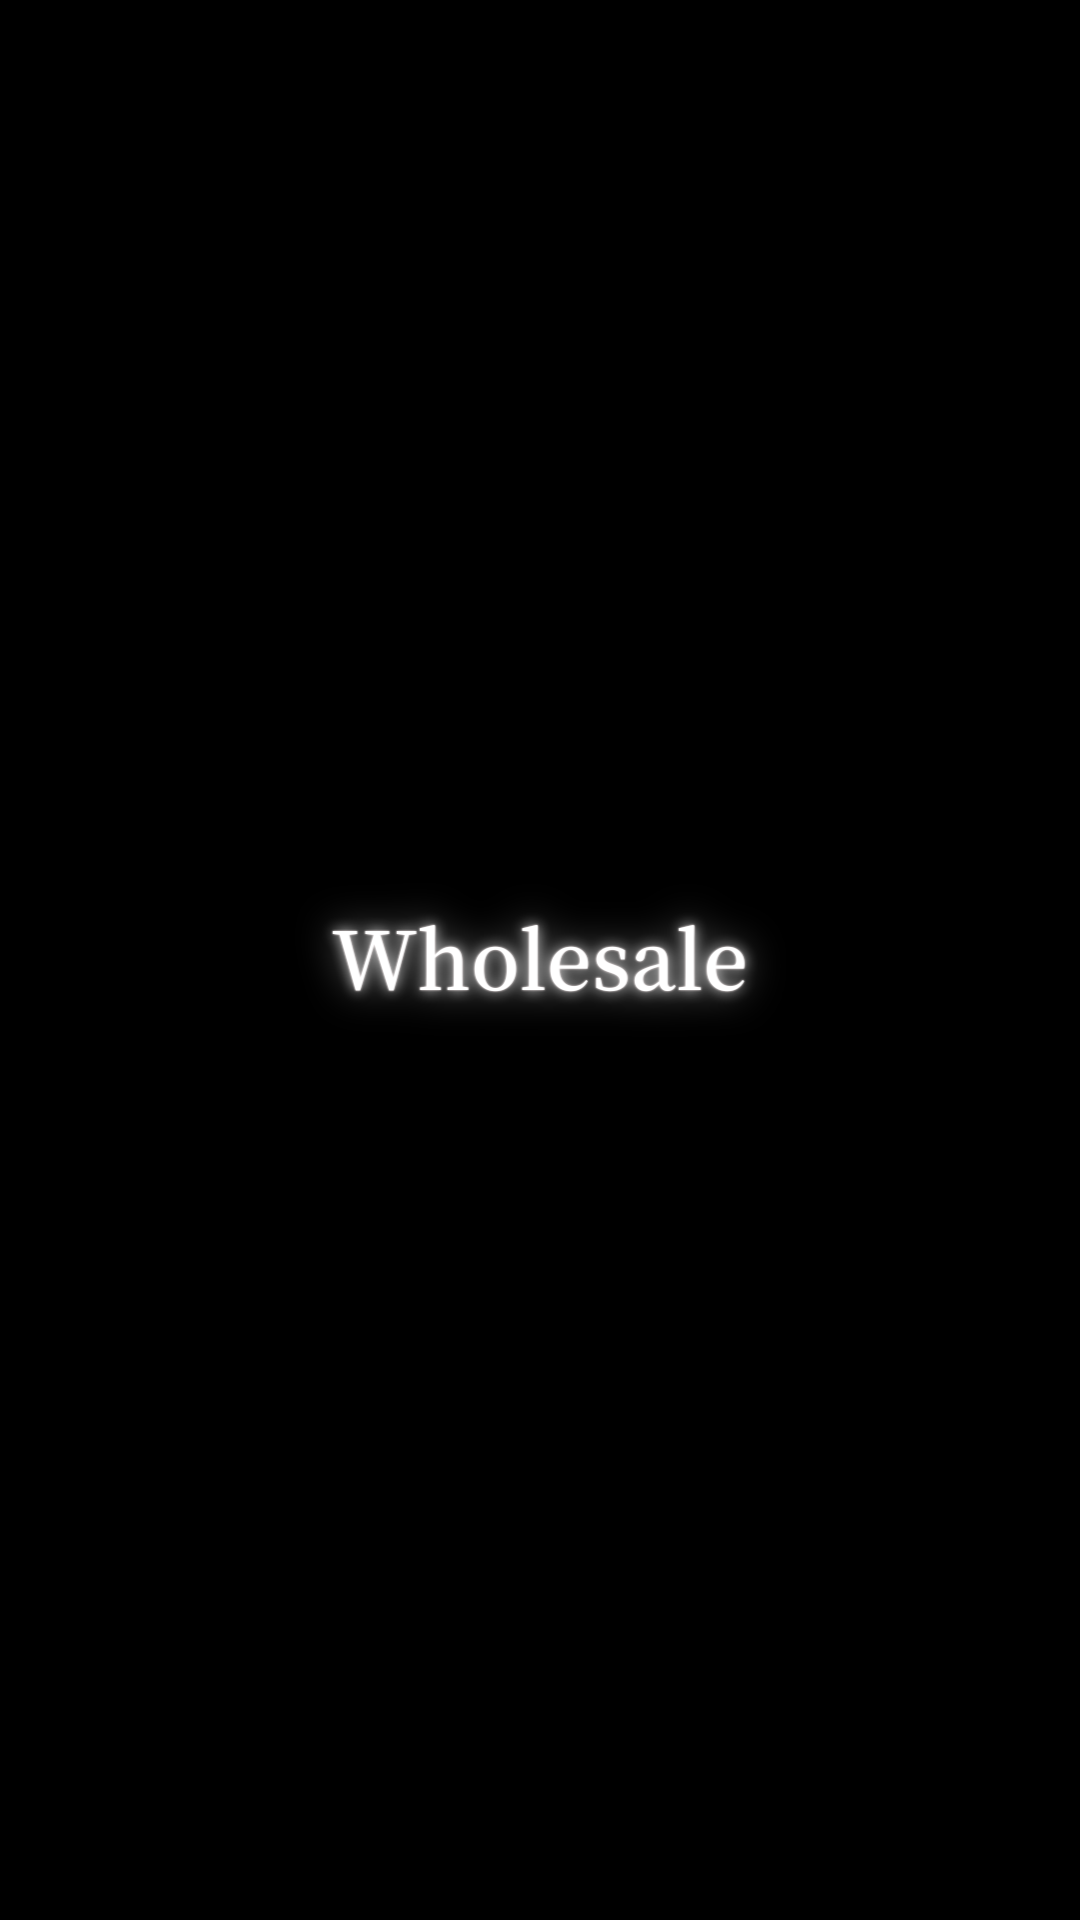 brand-wholesale-english.png